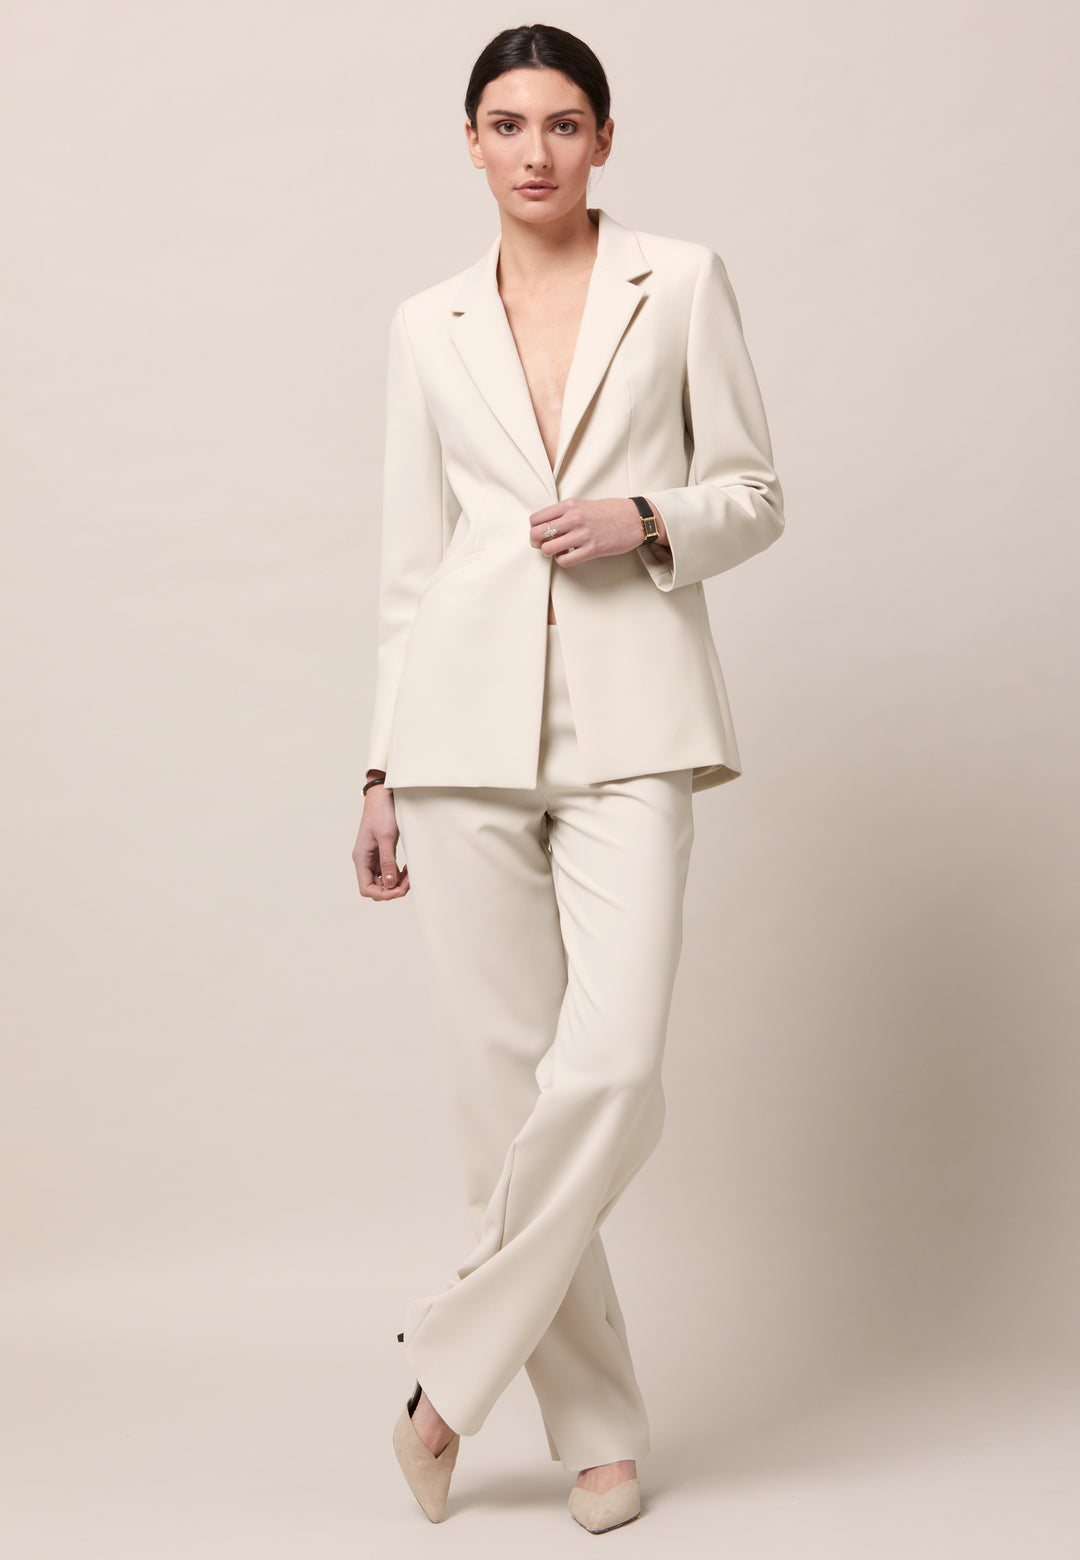 Willow, the investment-worthy tailored blazer. Engineered with a classic collar & revere and handy flap pockets. Cut to a semi fitted silhouette with a single button closure. Shown here in a sophisticated ivory tone. Pair with a simple tee for workwear appeal or elevate the look with the co-ordinating jill pant.